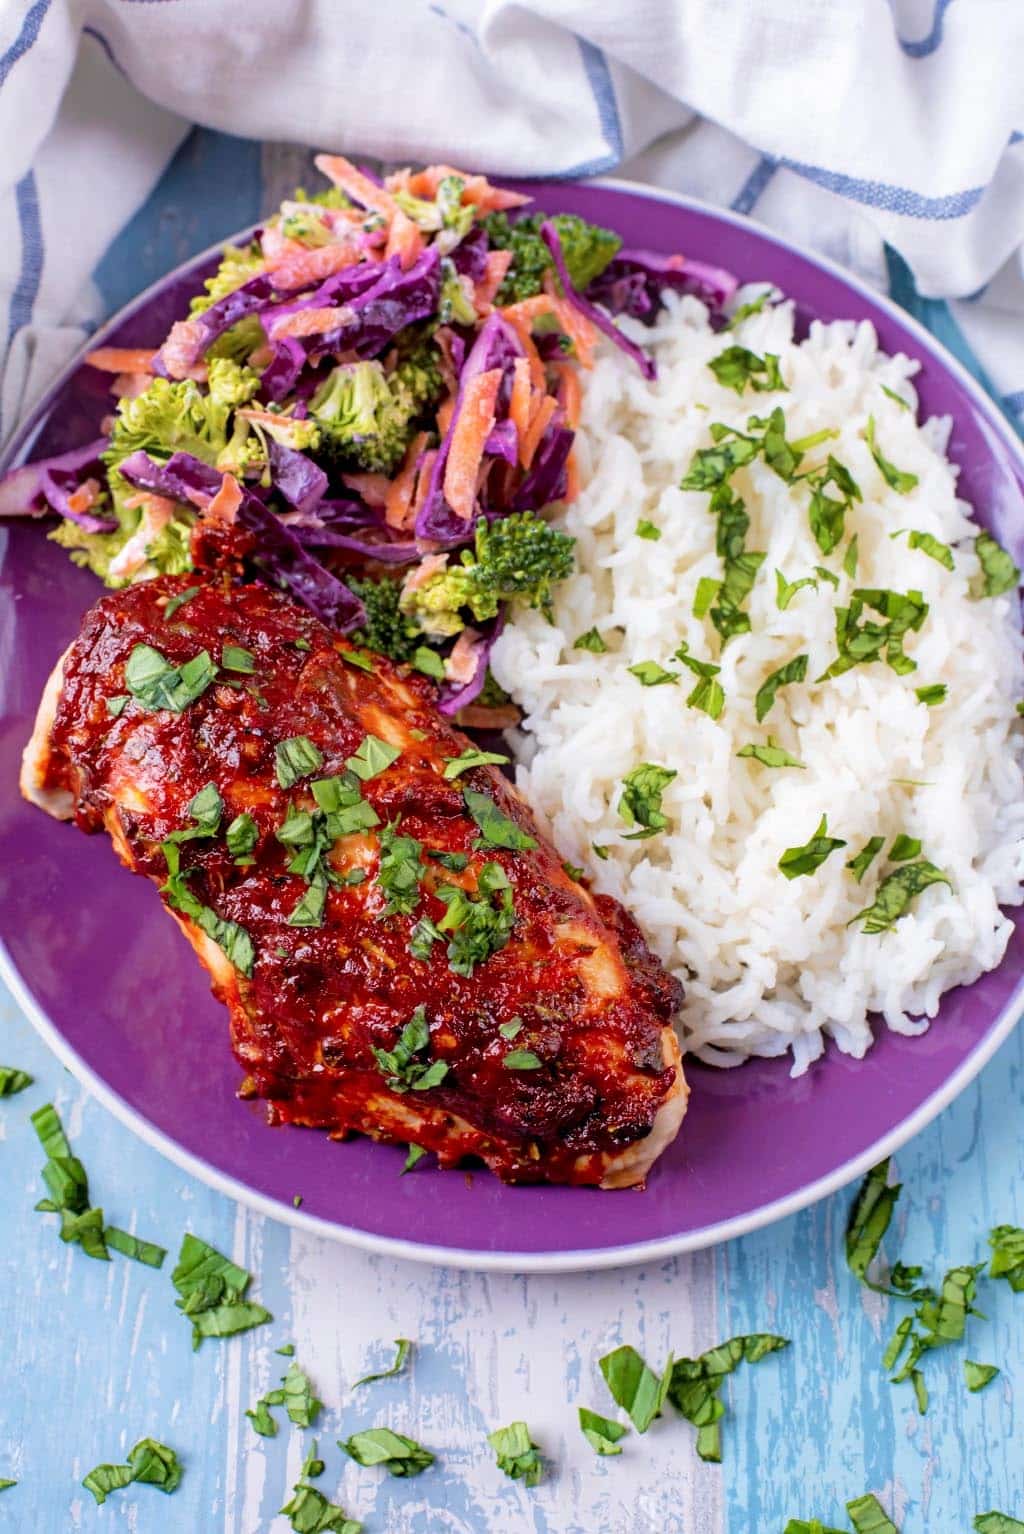 Coated chicken on a plate with rice and slaw.